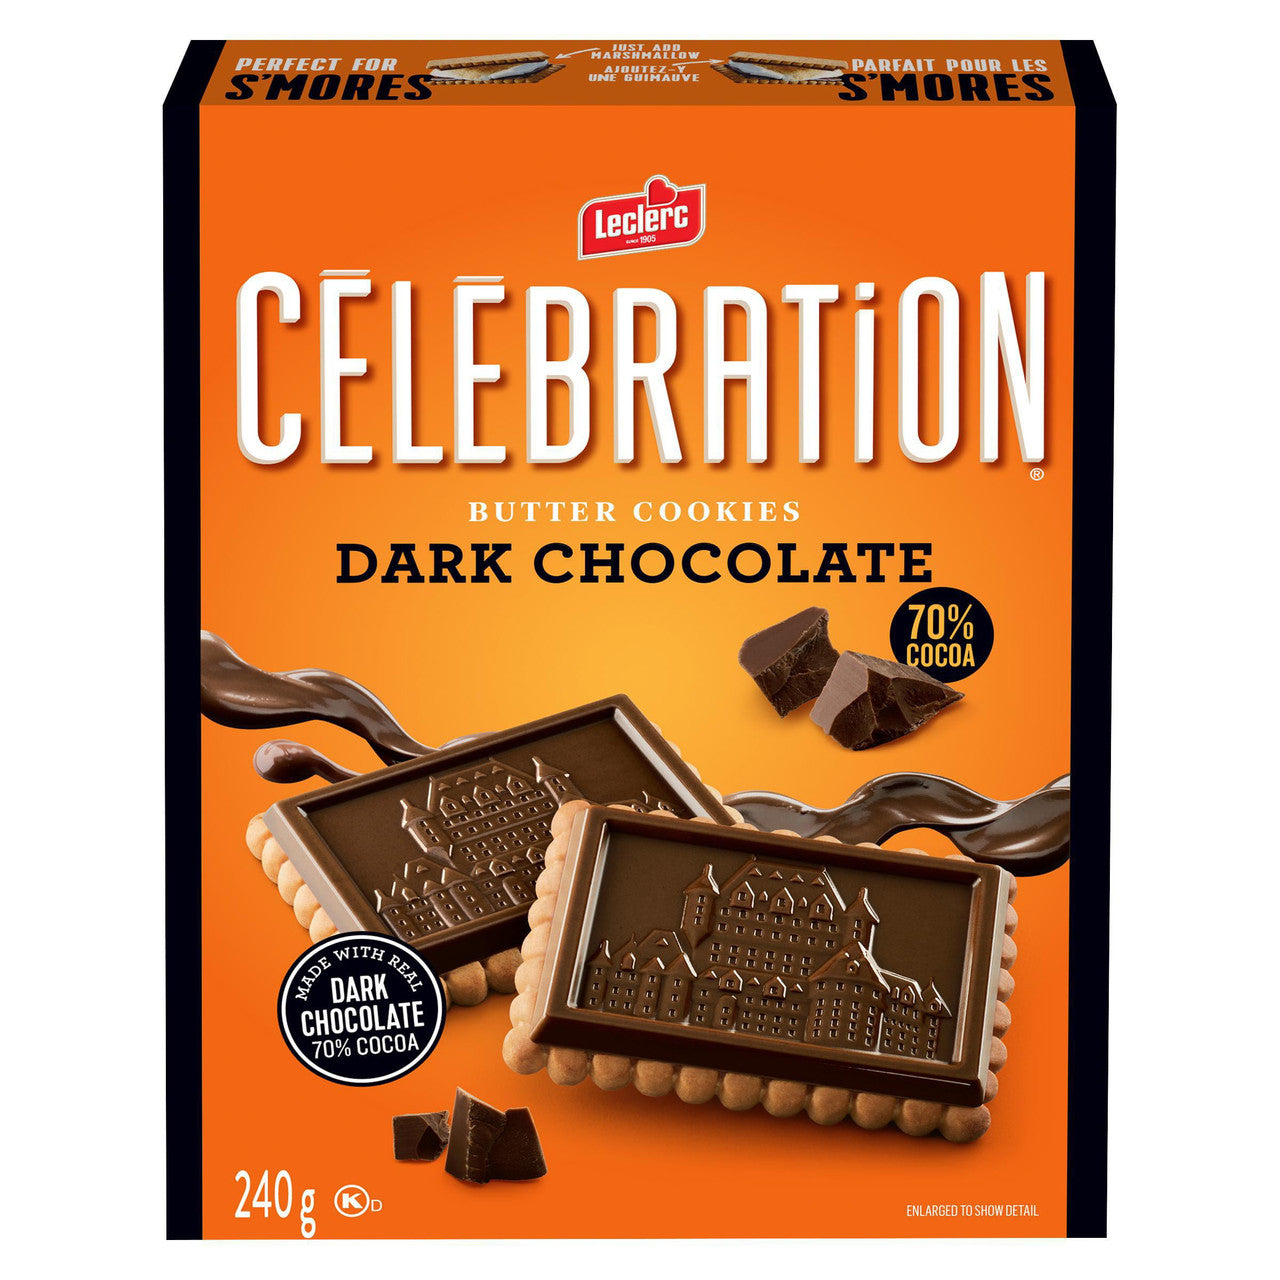 Leclerc Celebration Dark Chocolate 70% Cocoa Butter Cookies, 240g/8.5 oz. Box {Imported from Canada}